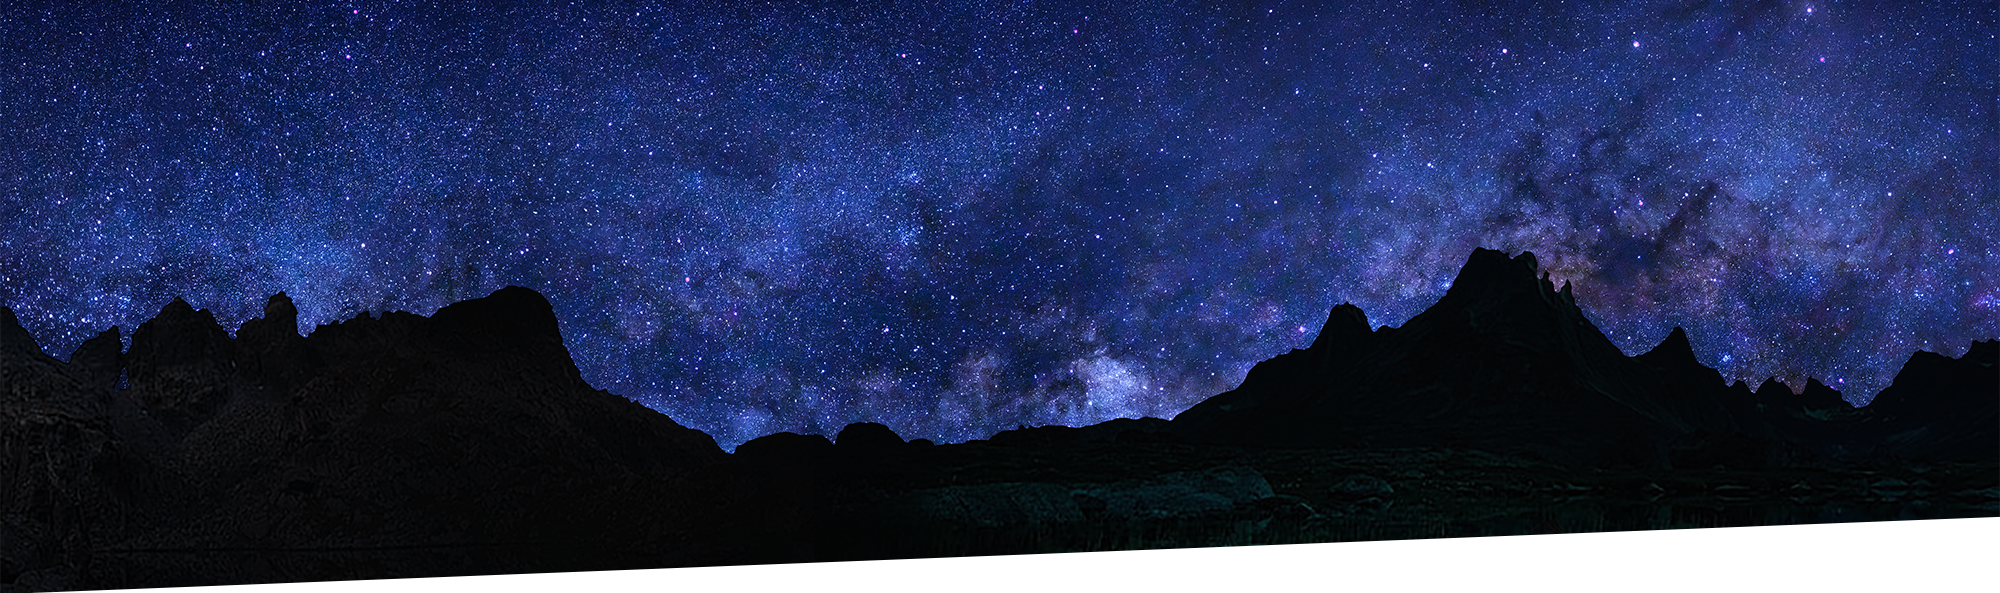 Mountains are silhouetted against a starry night sky